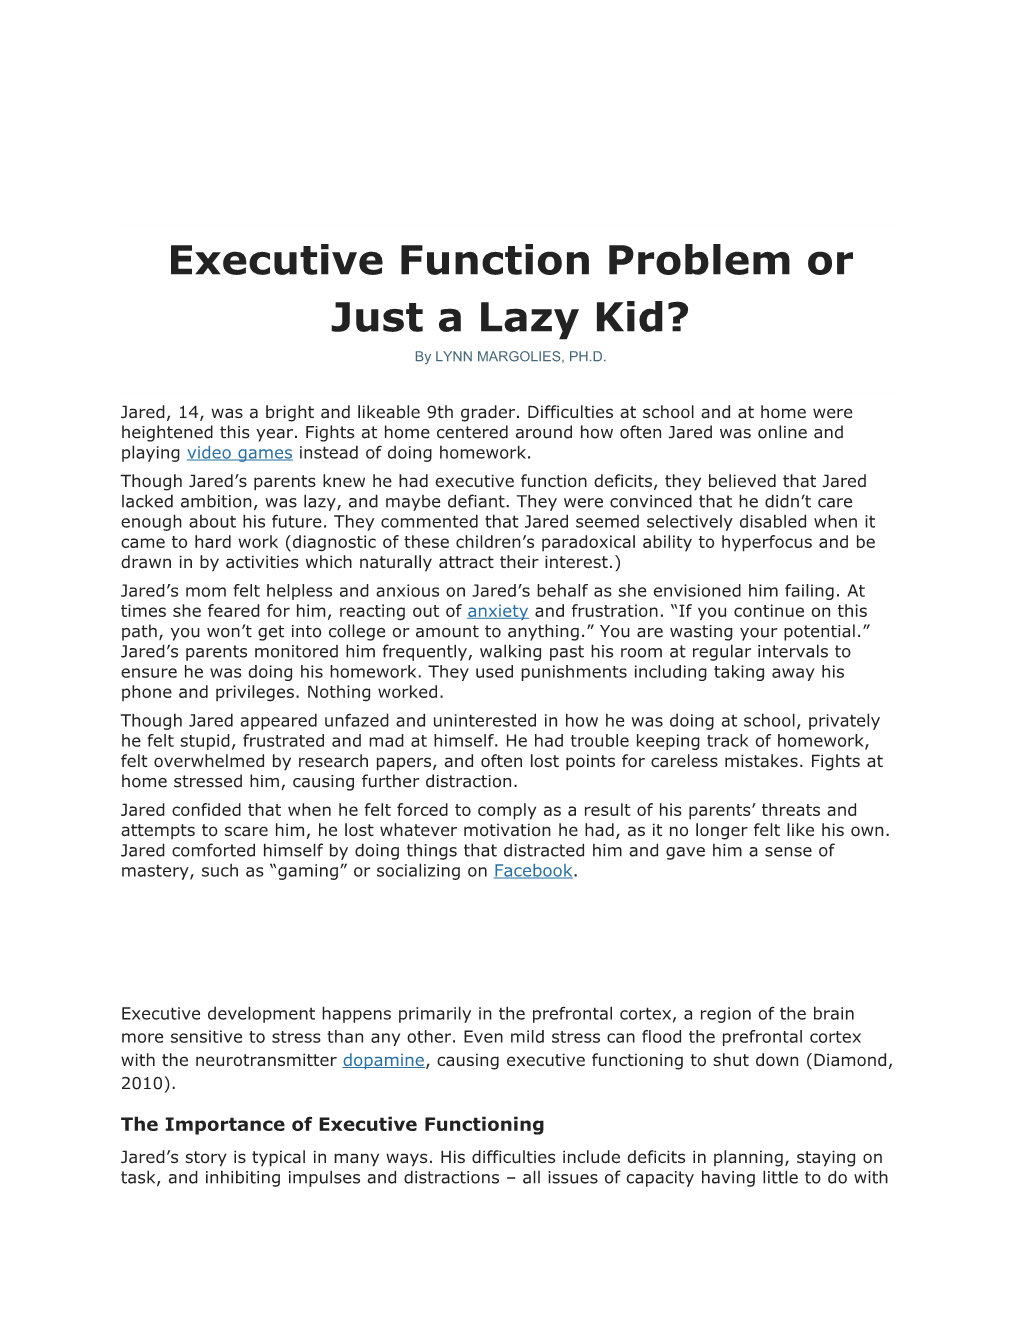 Executive Function Problem Or